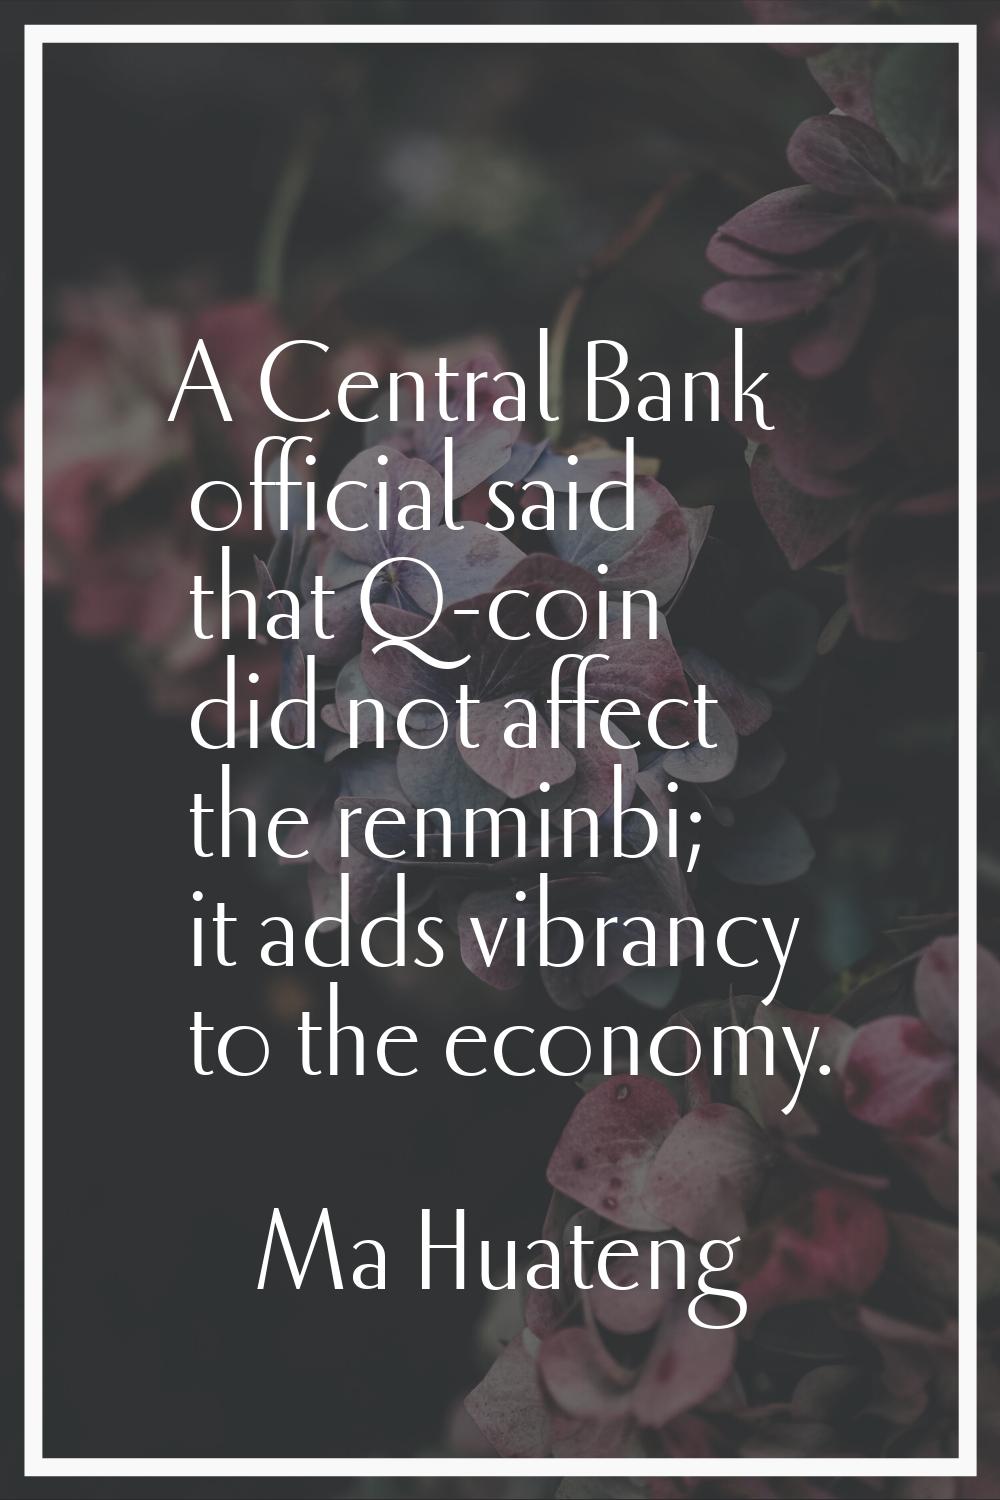 A Central Bank official said that Q-coin did not affect the renminbi; it adds vibrancy to the econo